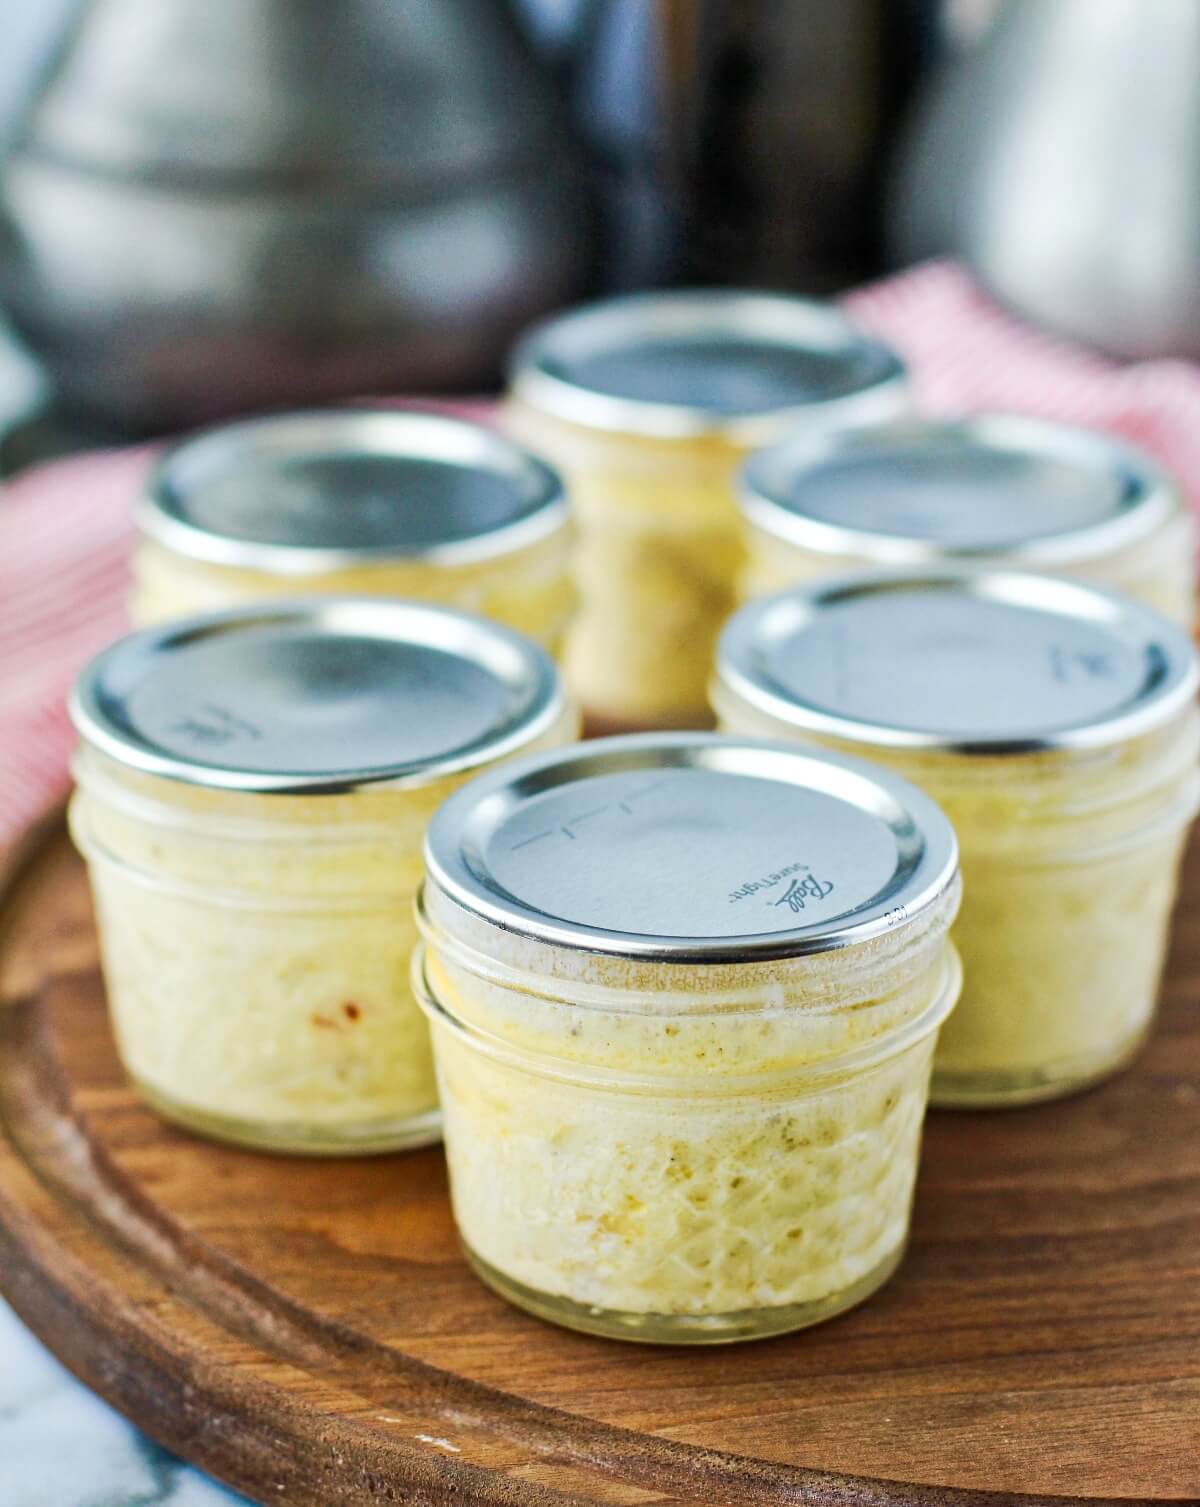 Sous Vide Ham and Cheese Egg Bites jars